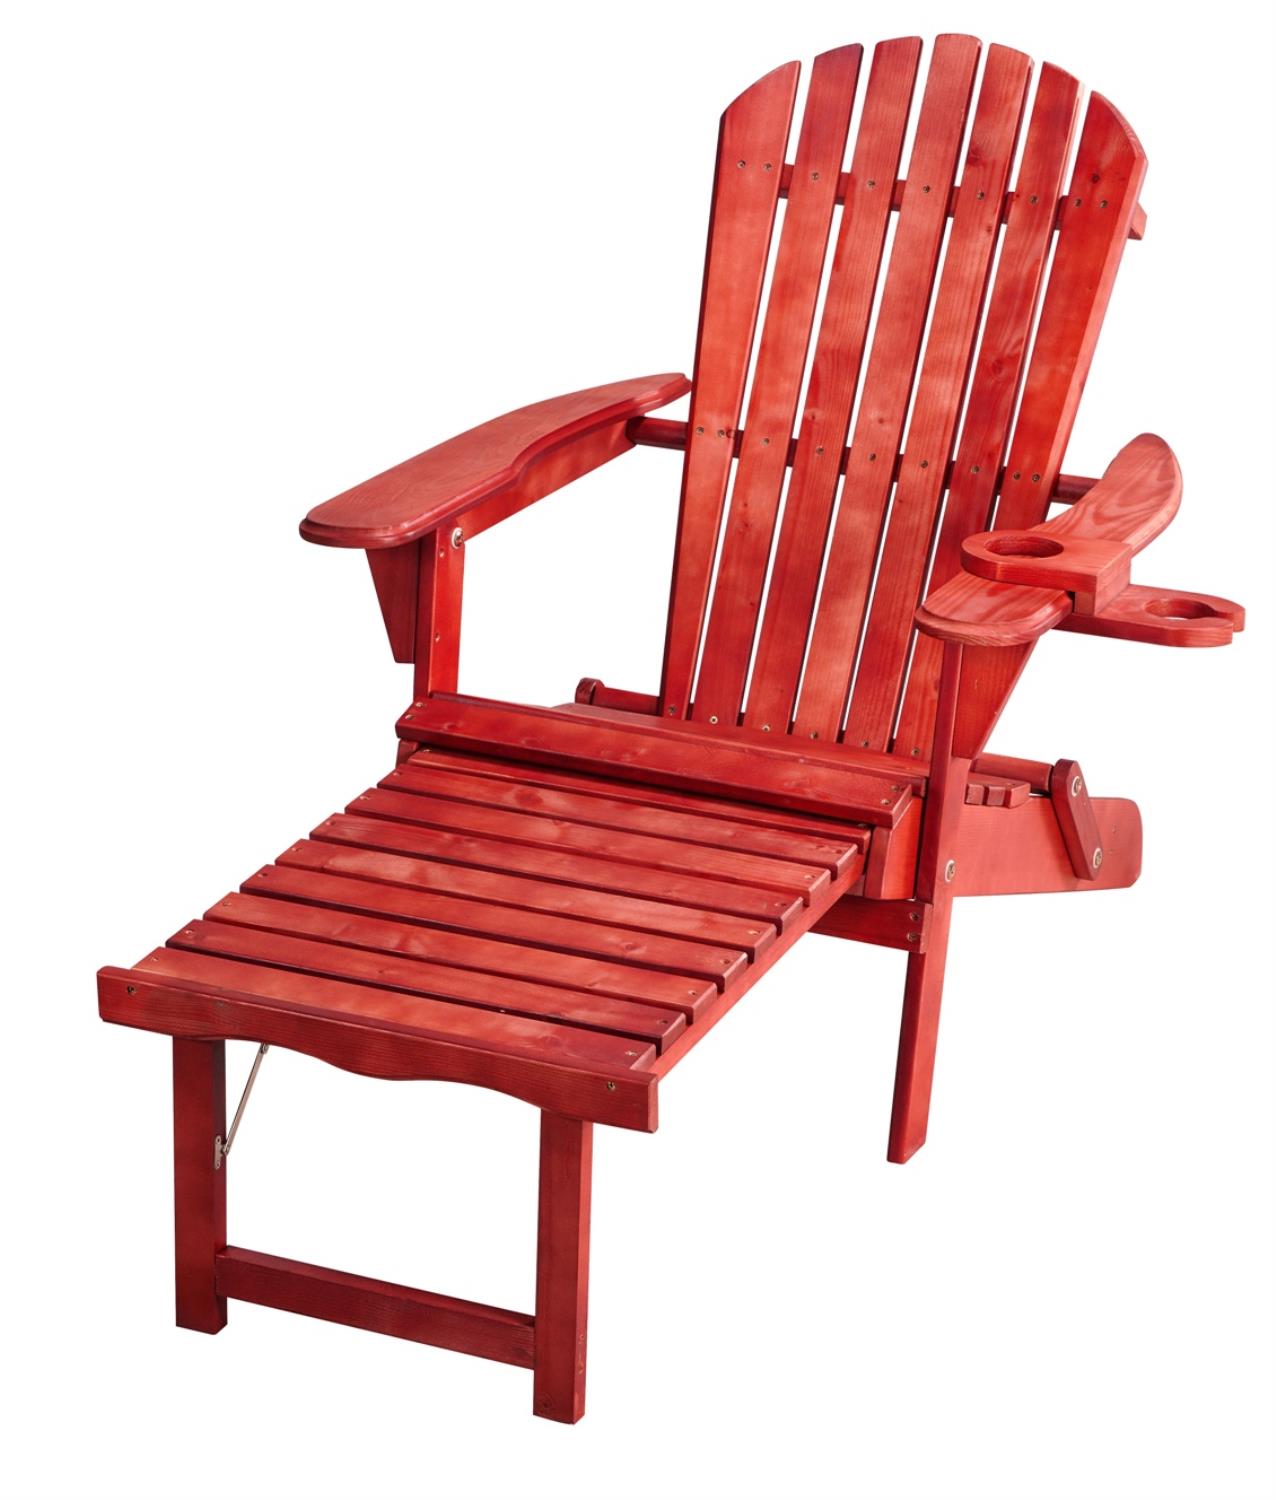 W Unlimited  Oceanic Collection Outdoor Bistro Adirondack Chaise Lounge Foldable Chair Set with Cup & Glass Holder & Built in Ottoman, Red - Wood - 2 Piece - image 2 of 3